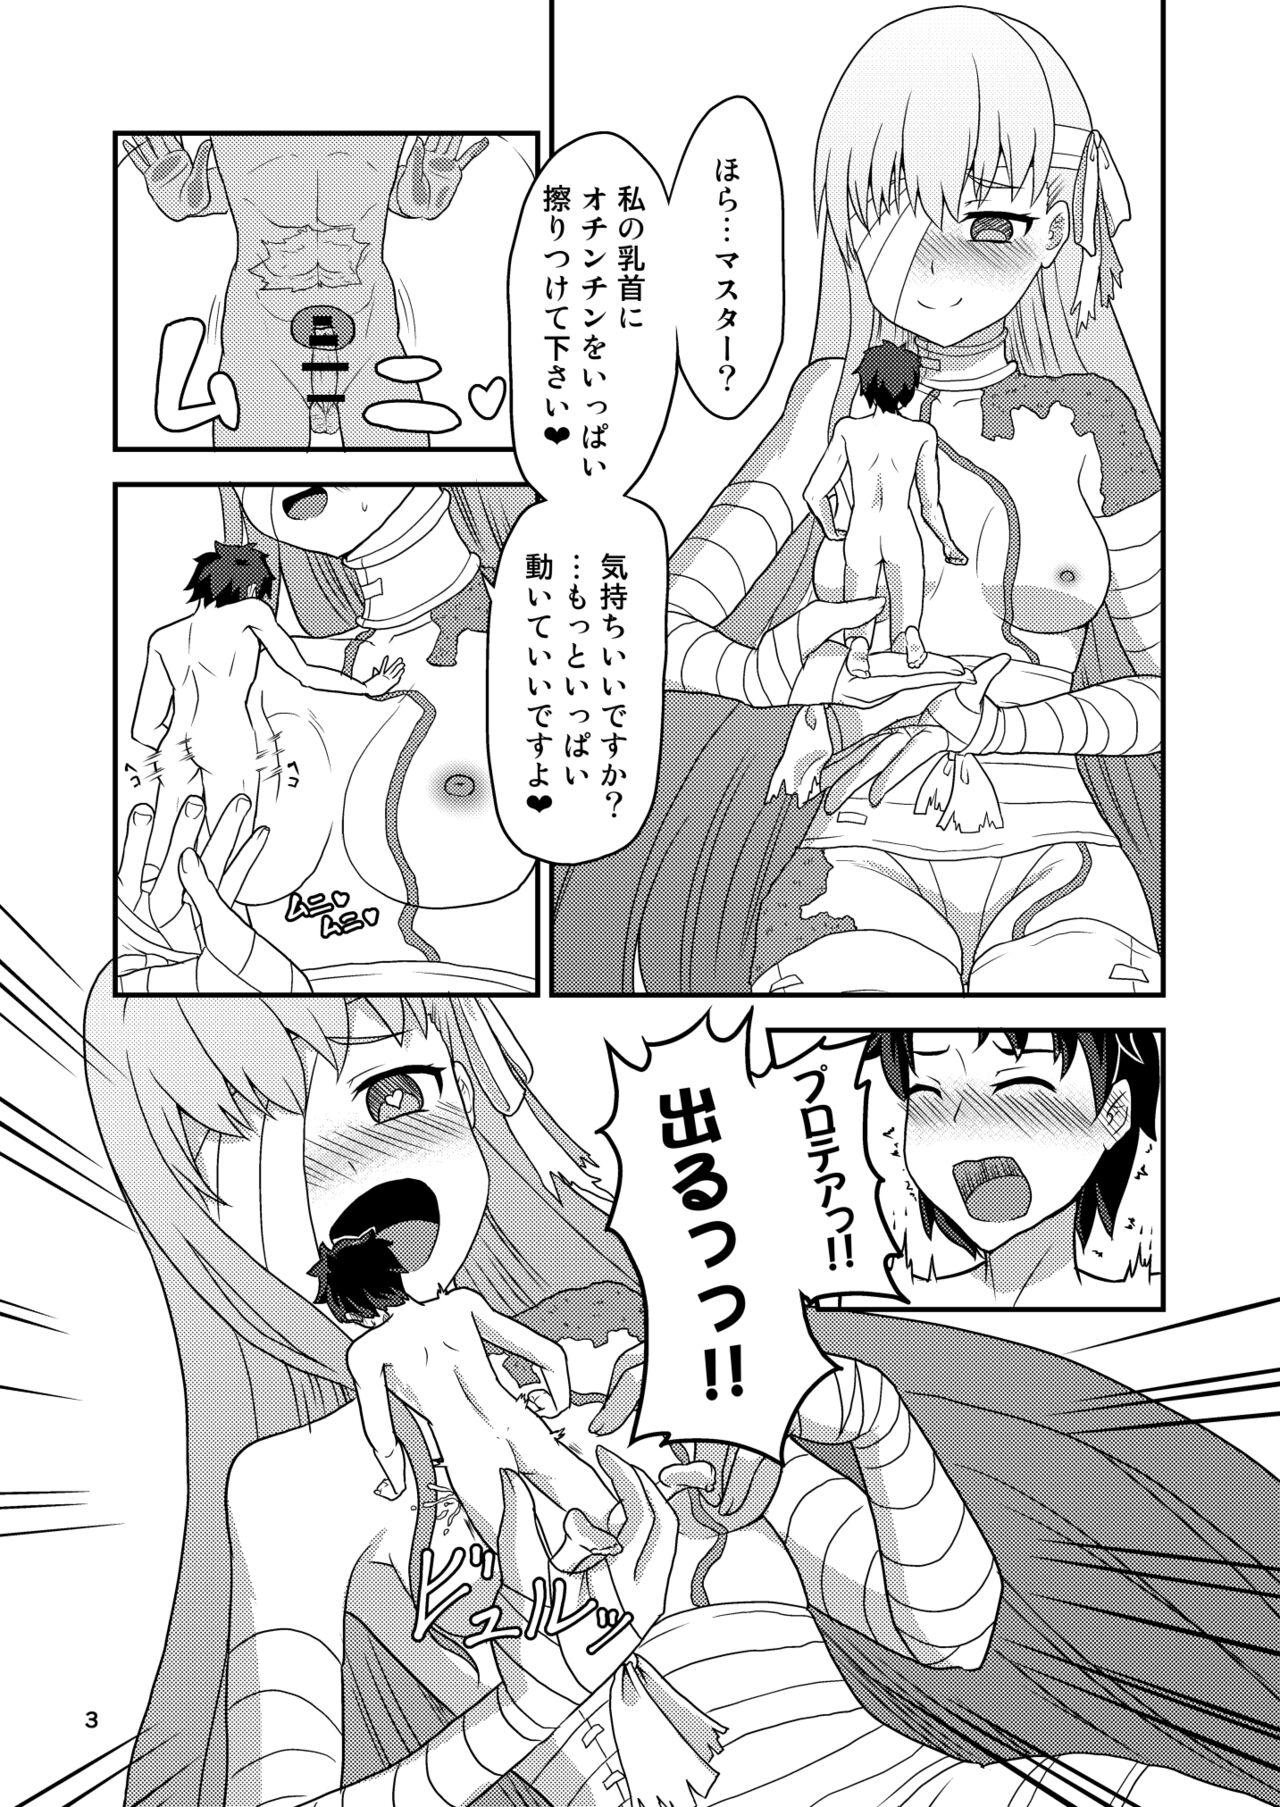 Ametuer Porn Hな私をゆるしてください - Fate grand order Toy - Page 4